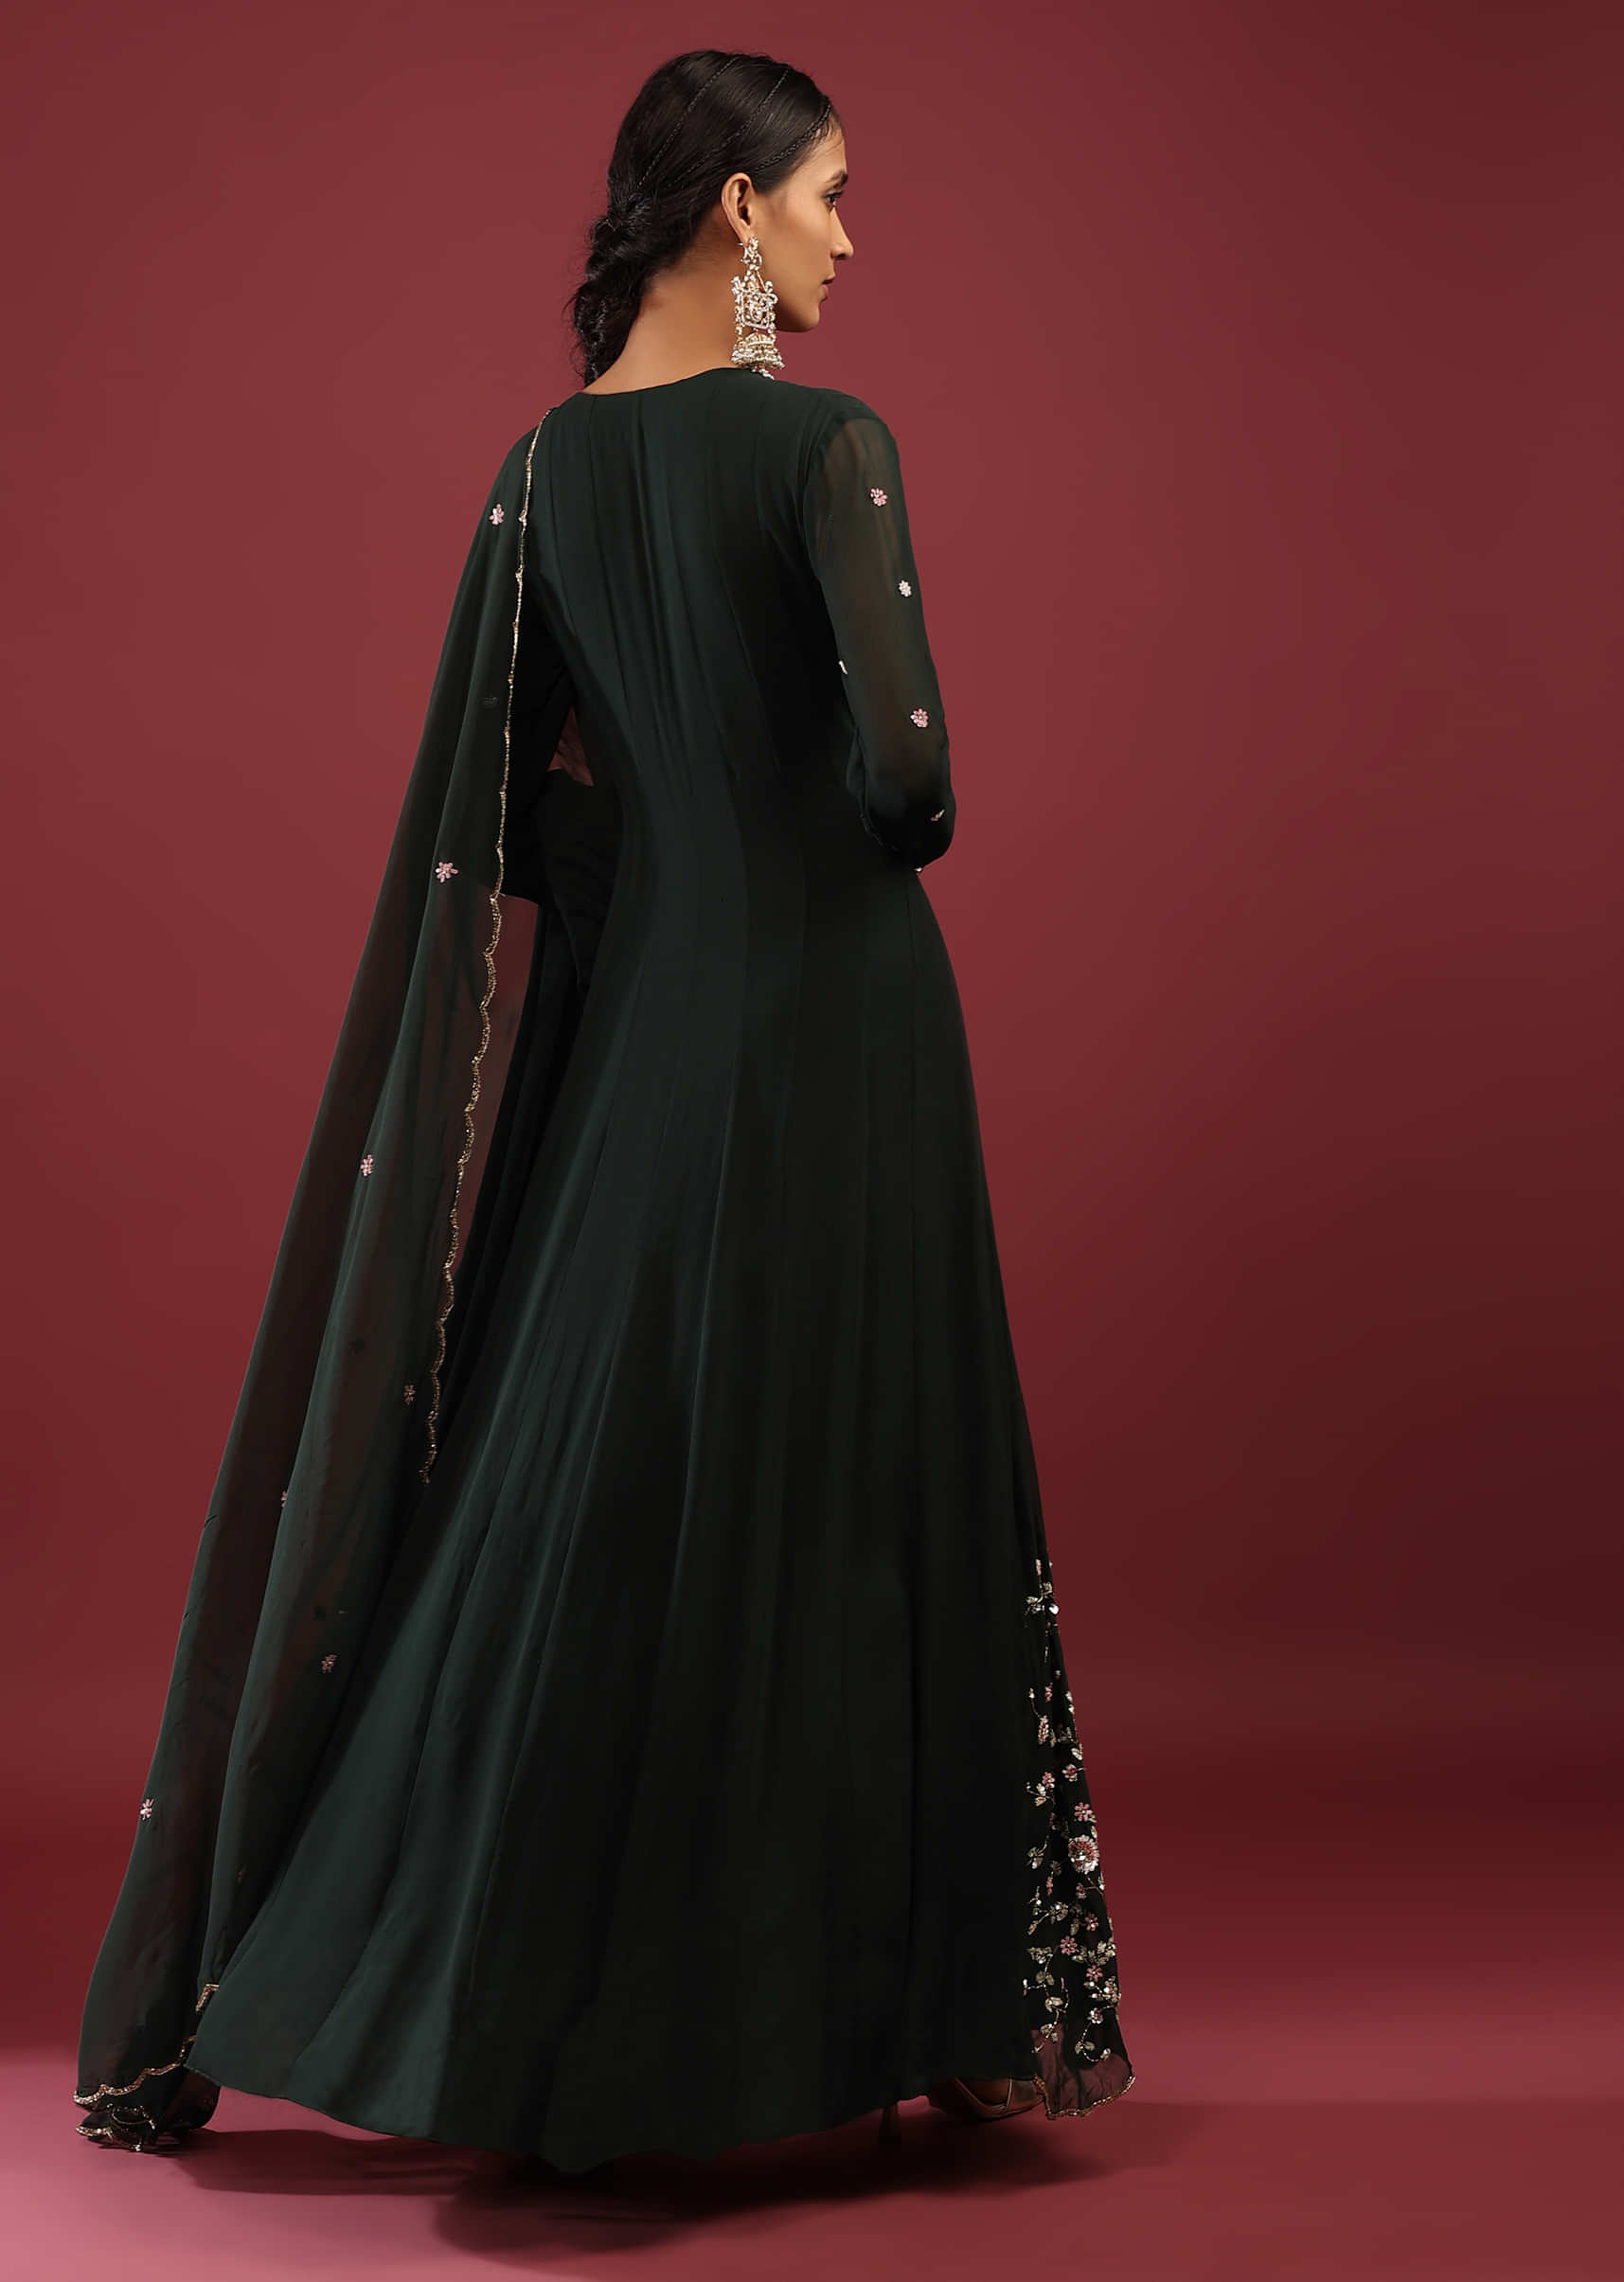 Peacock Green Anarkali Suit In Georgette With Multicolored Sequin Embroidered Floral Design